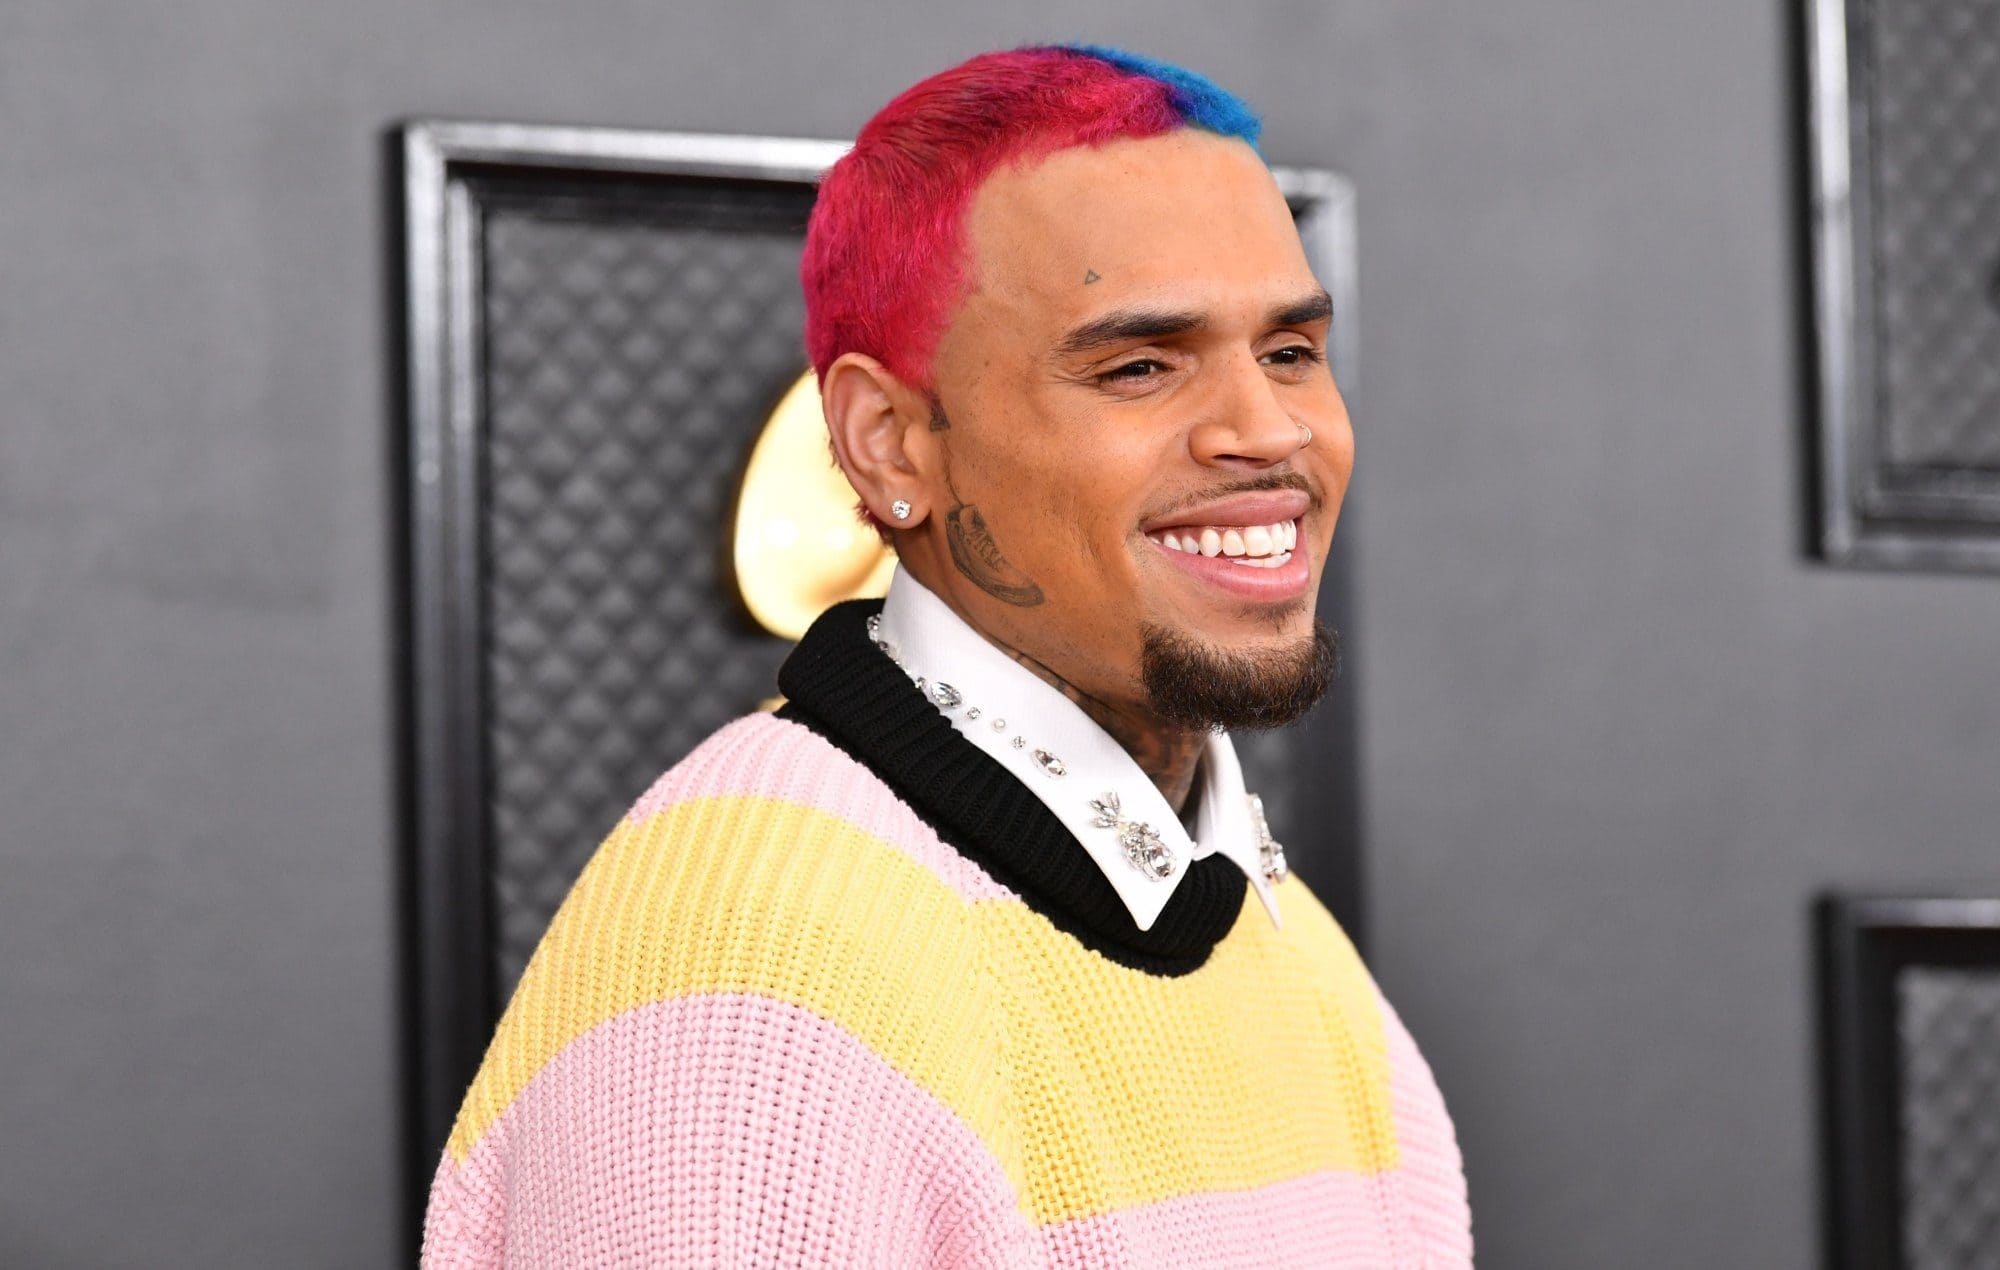 Chris Brown (Singer) Wiki, Age, Wife, Net Worth & More 3